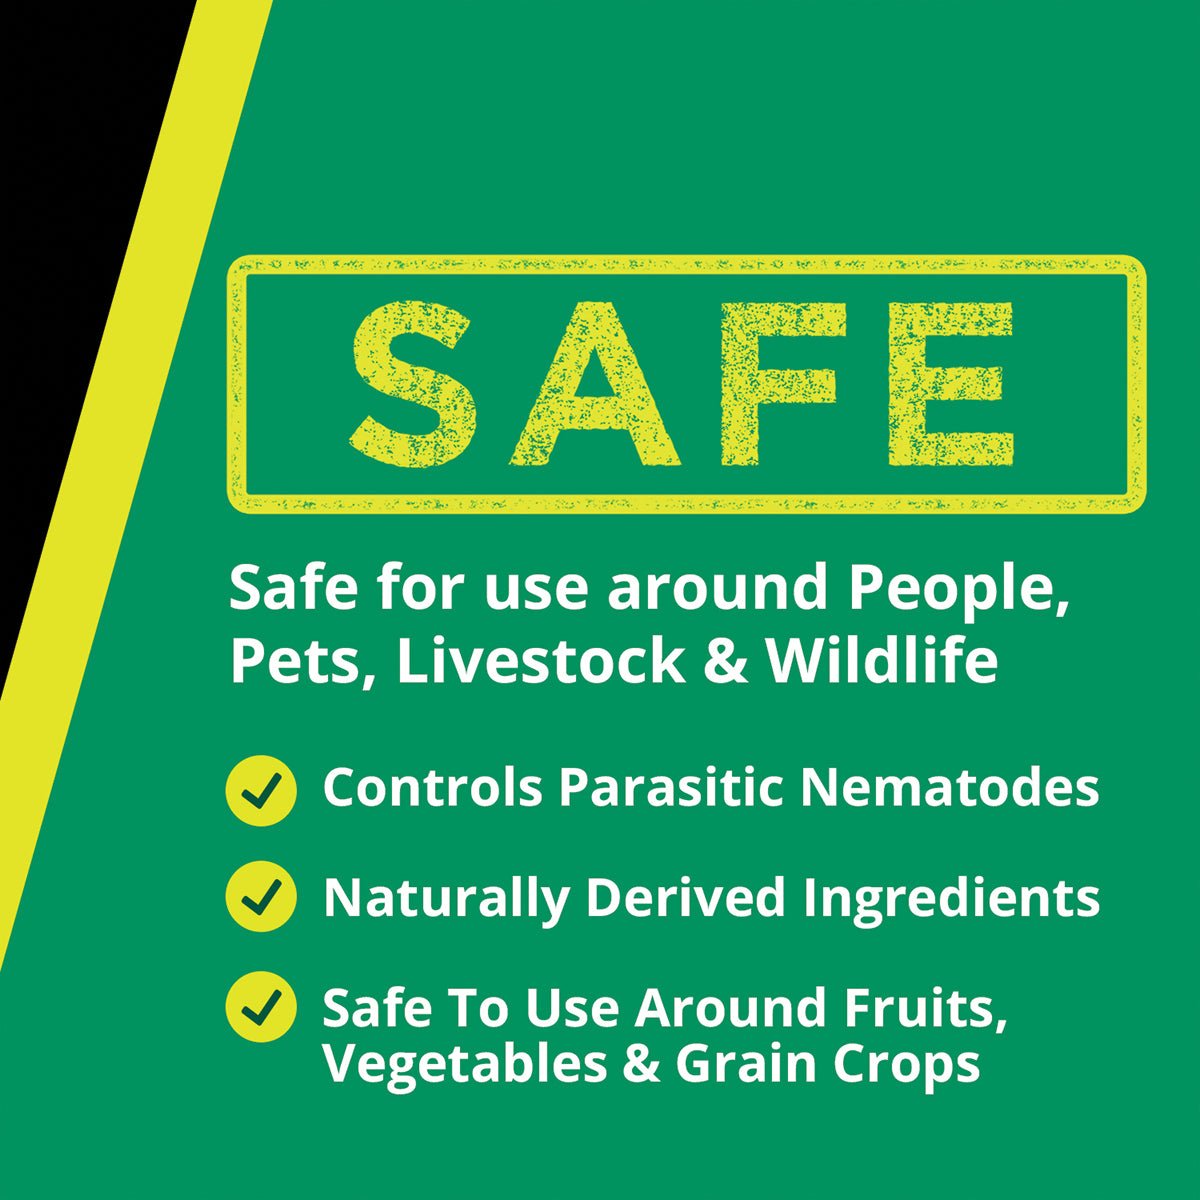 Stop Bugging Me!™ Nematode Control is safe for use around people, pets, livestock and wildlife. Controls parasitic nematodes. Naturally derived ingredients, safe to use around fruits, vegetables & grain crops.